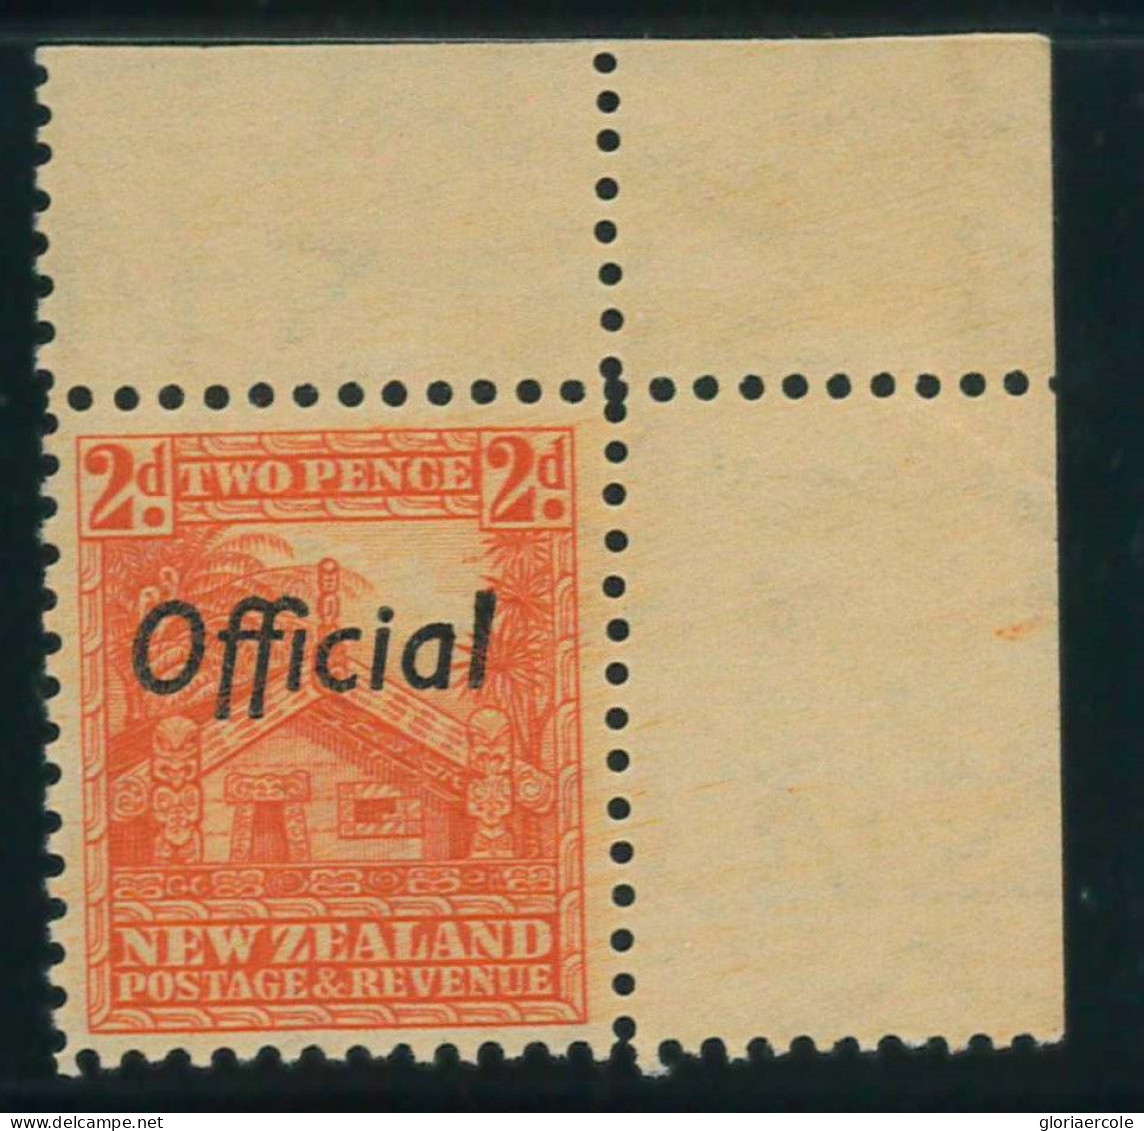 P3081 C - NEW ZEALAND, OFFICIAL STAMP S.GIBBONS, 0123 B MNH - Officials